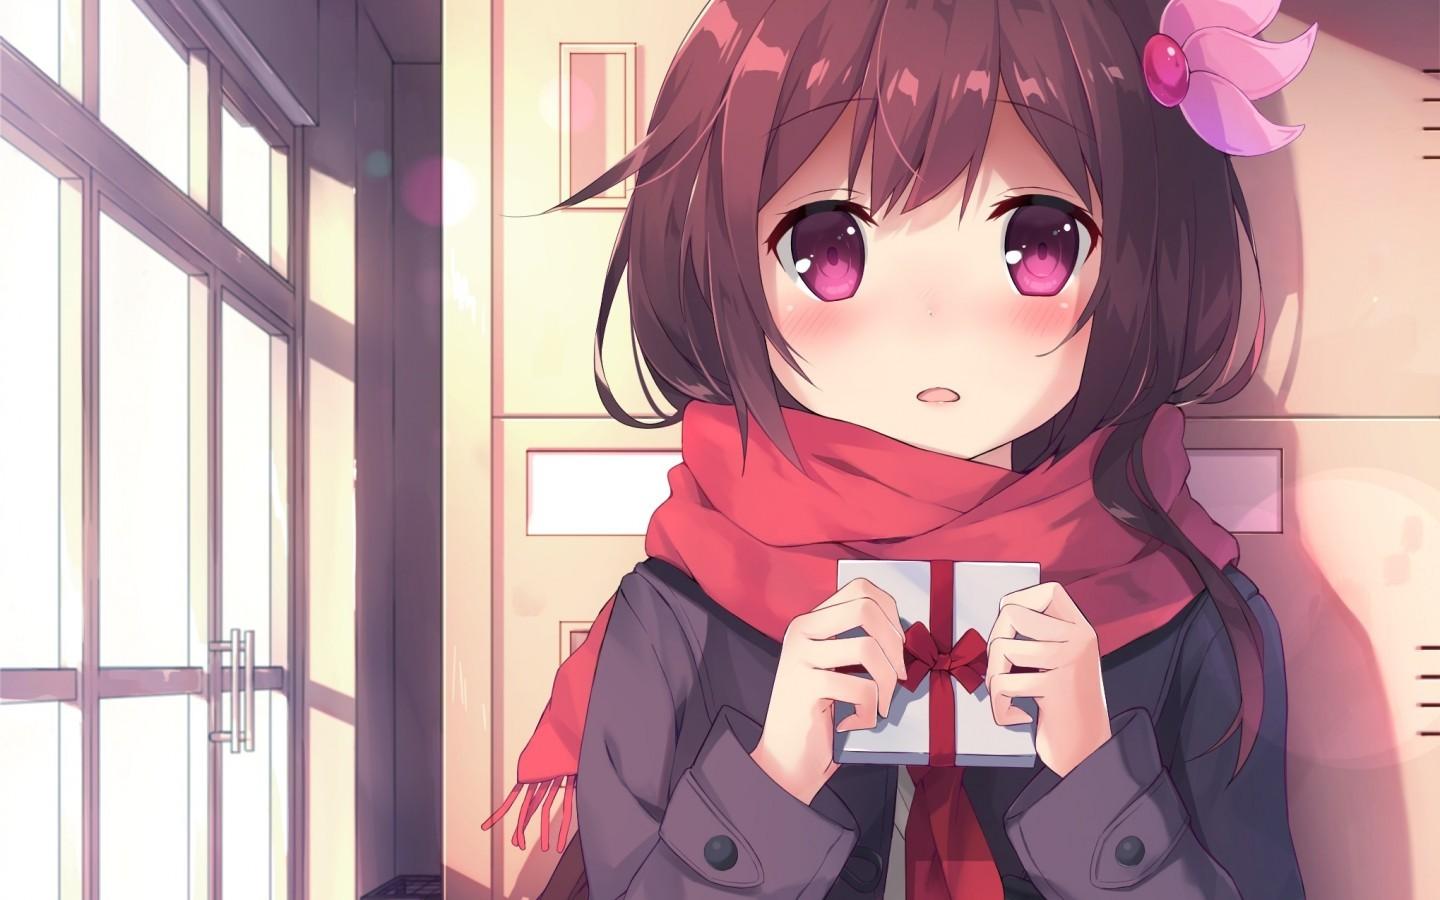 Download 1440x900 Anime Girl, Valentine's Day Shy Expression